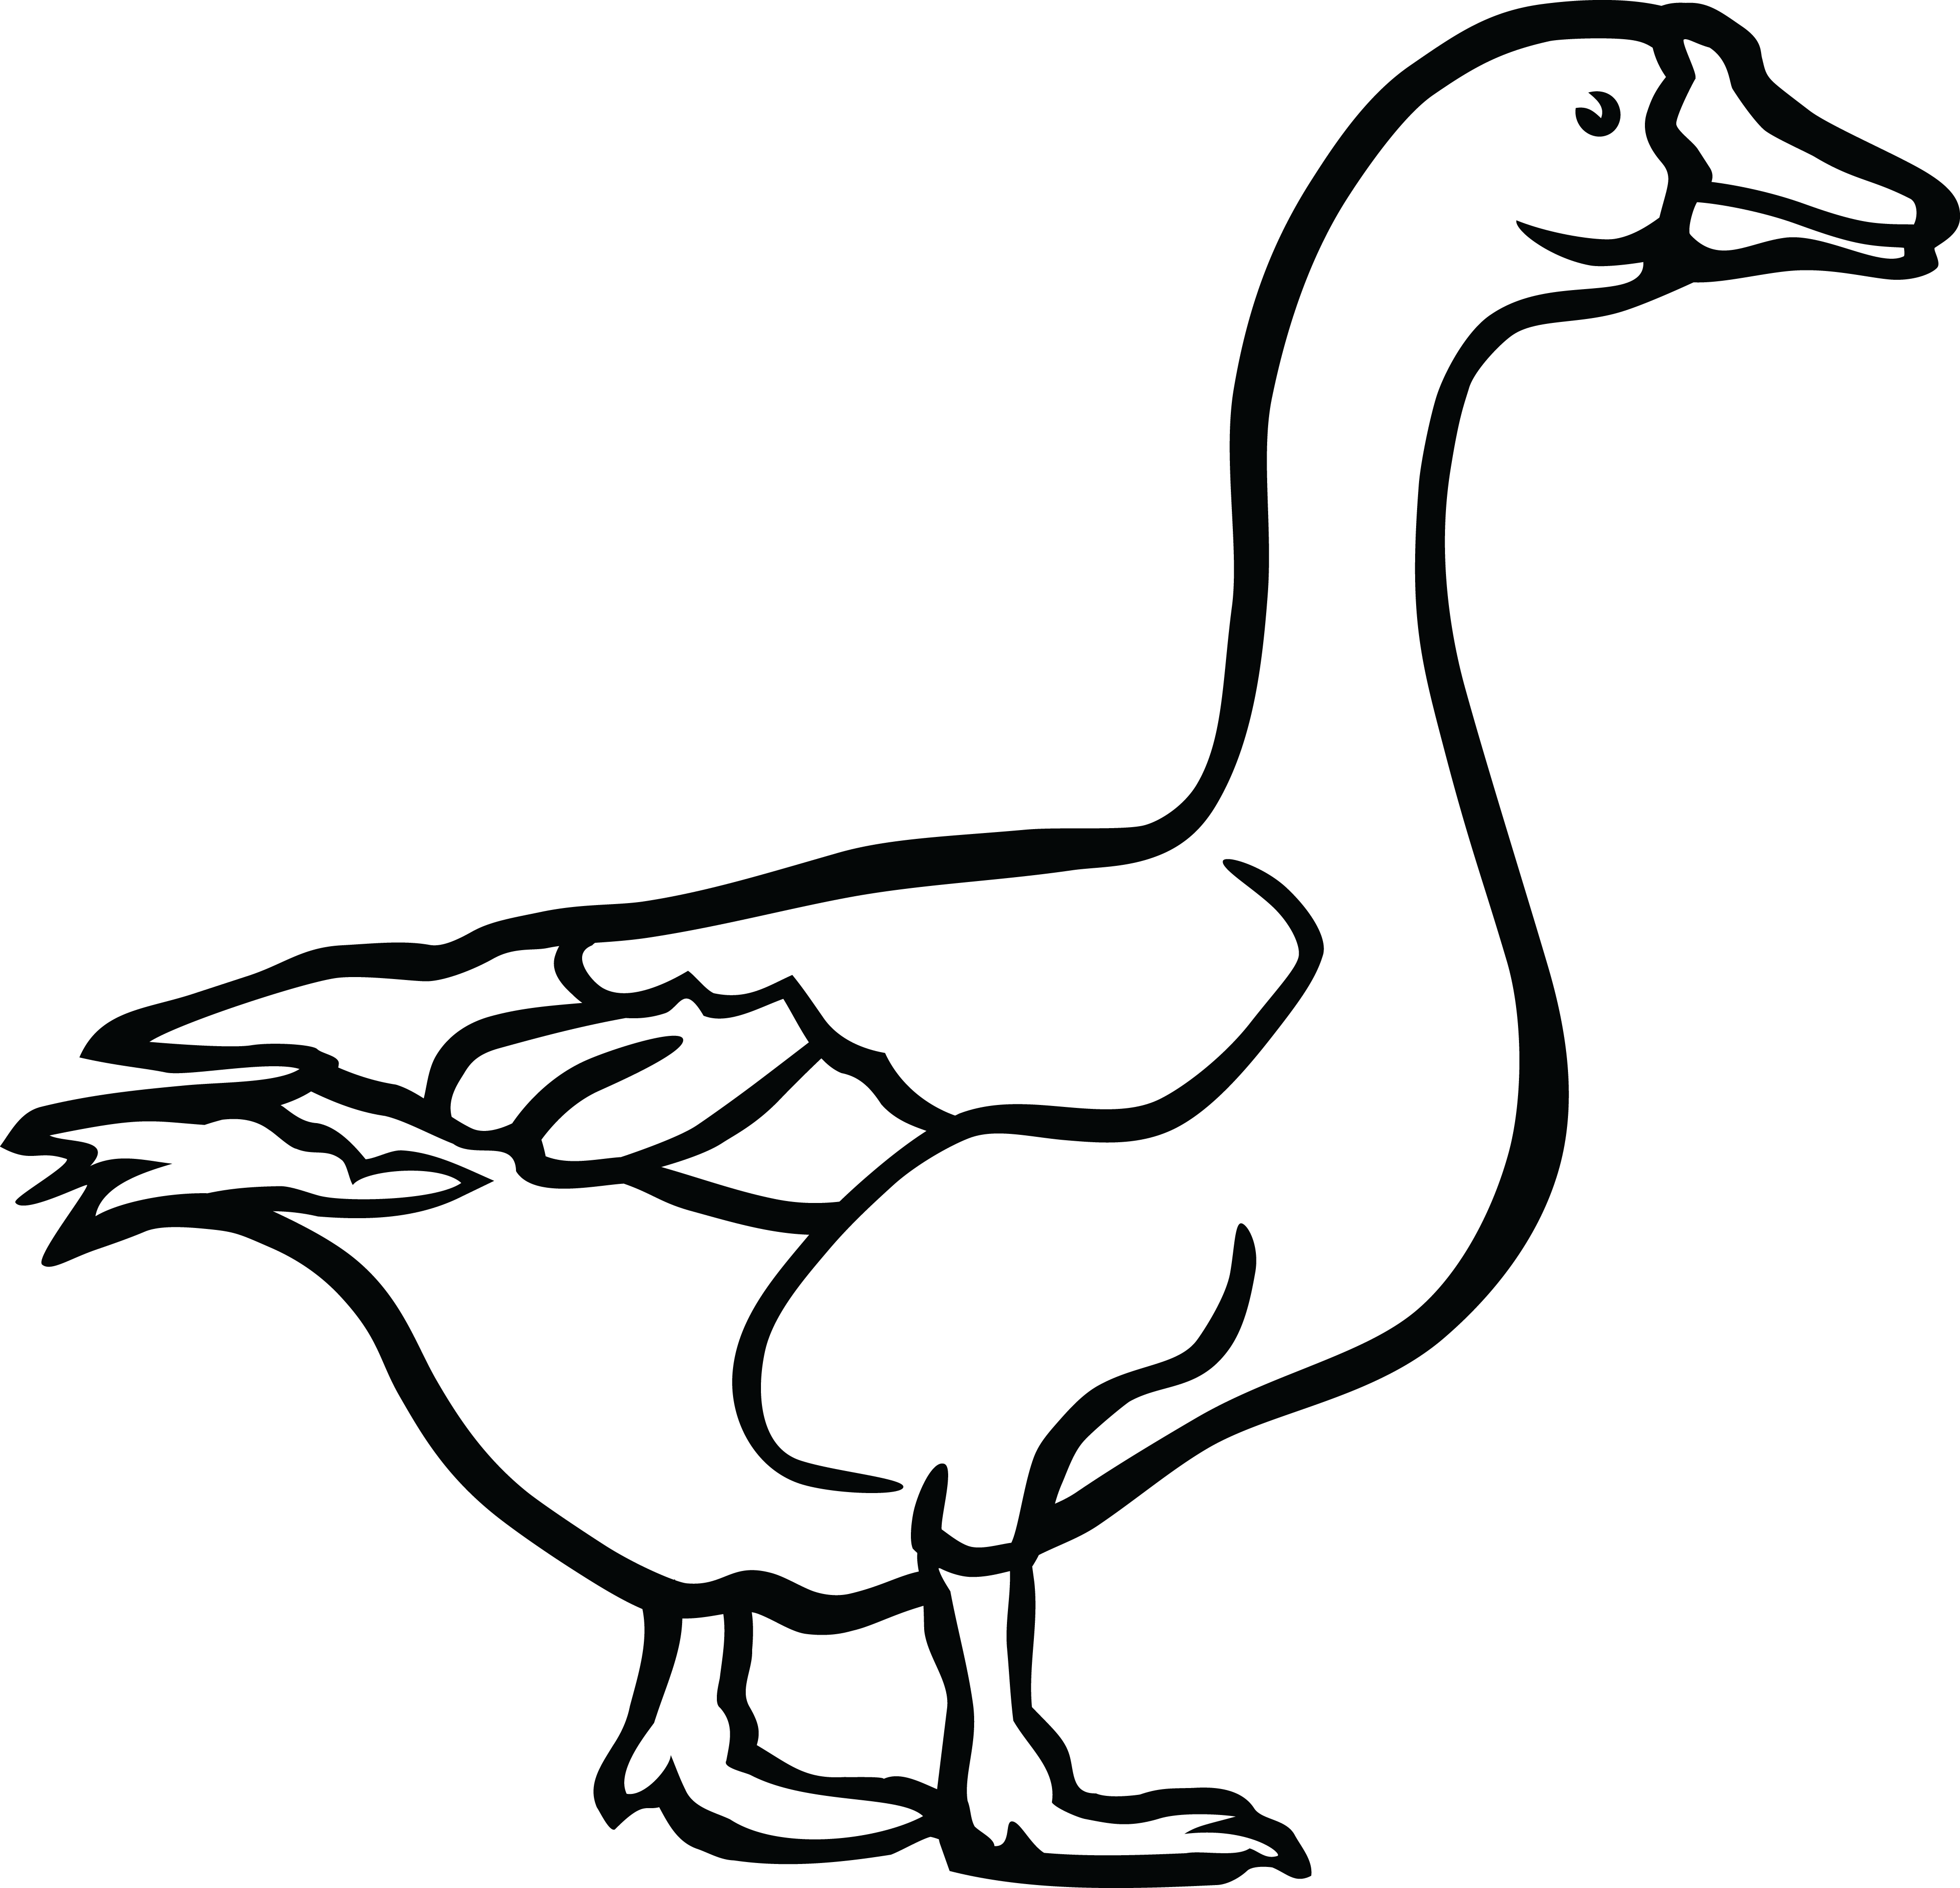  collection of duck. Ducks clipart black and white